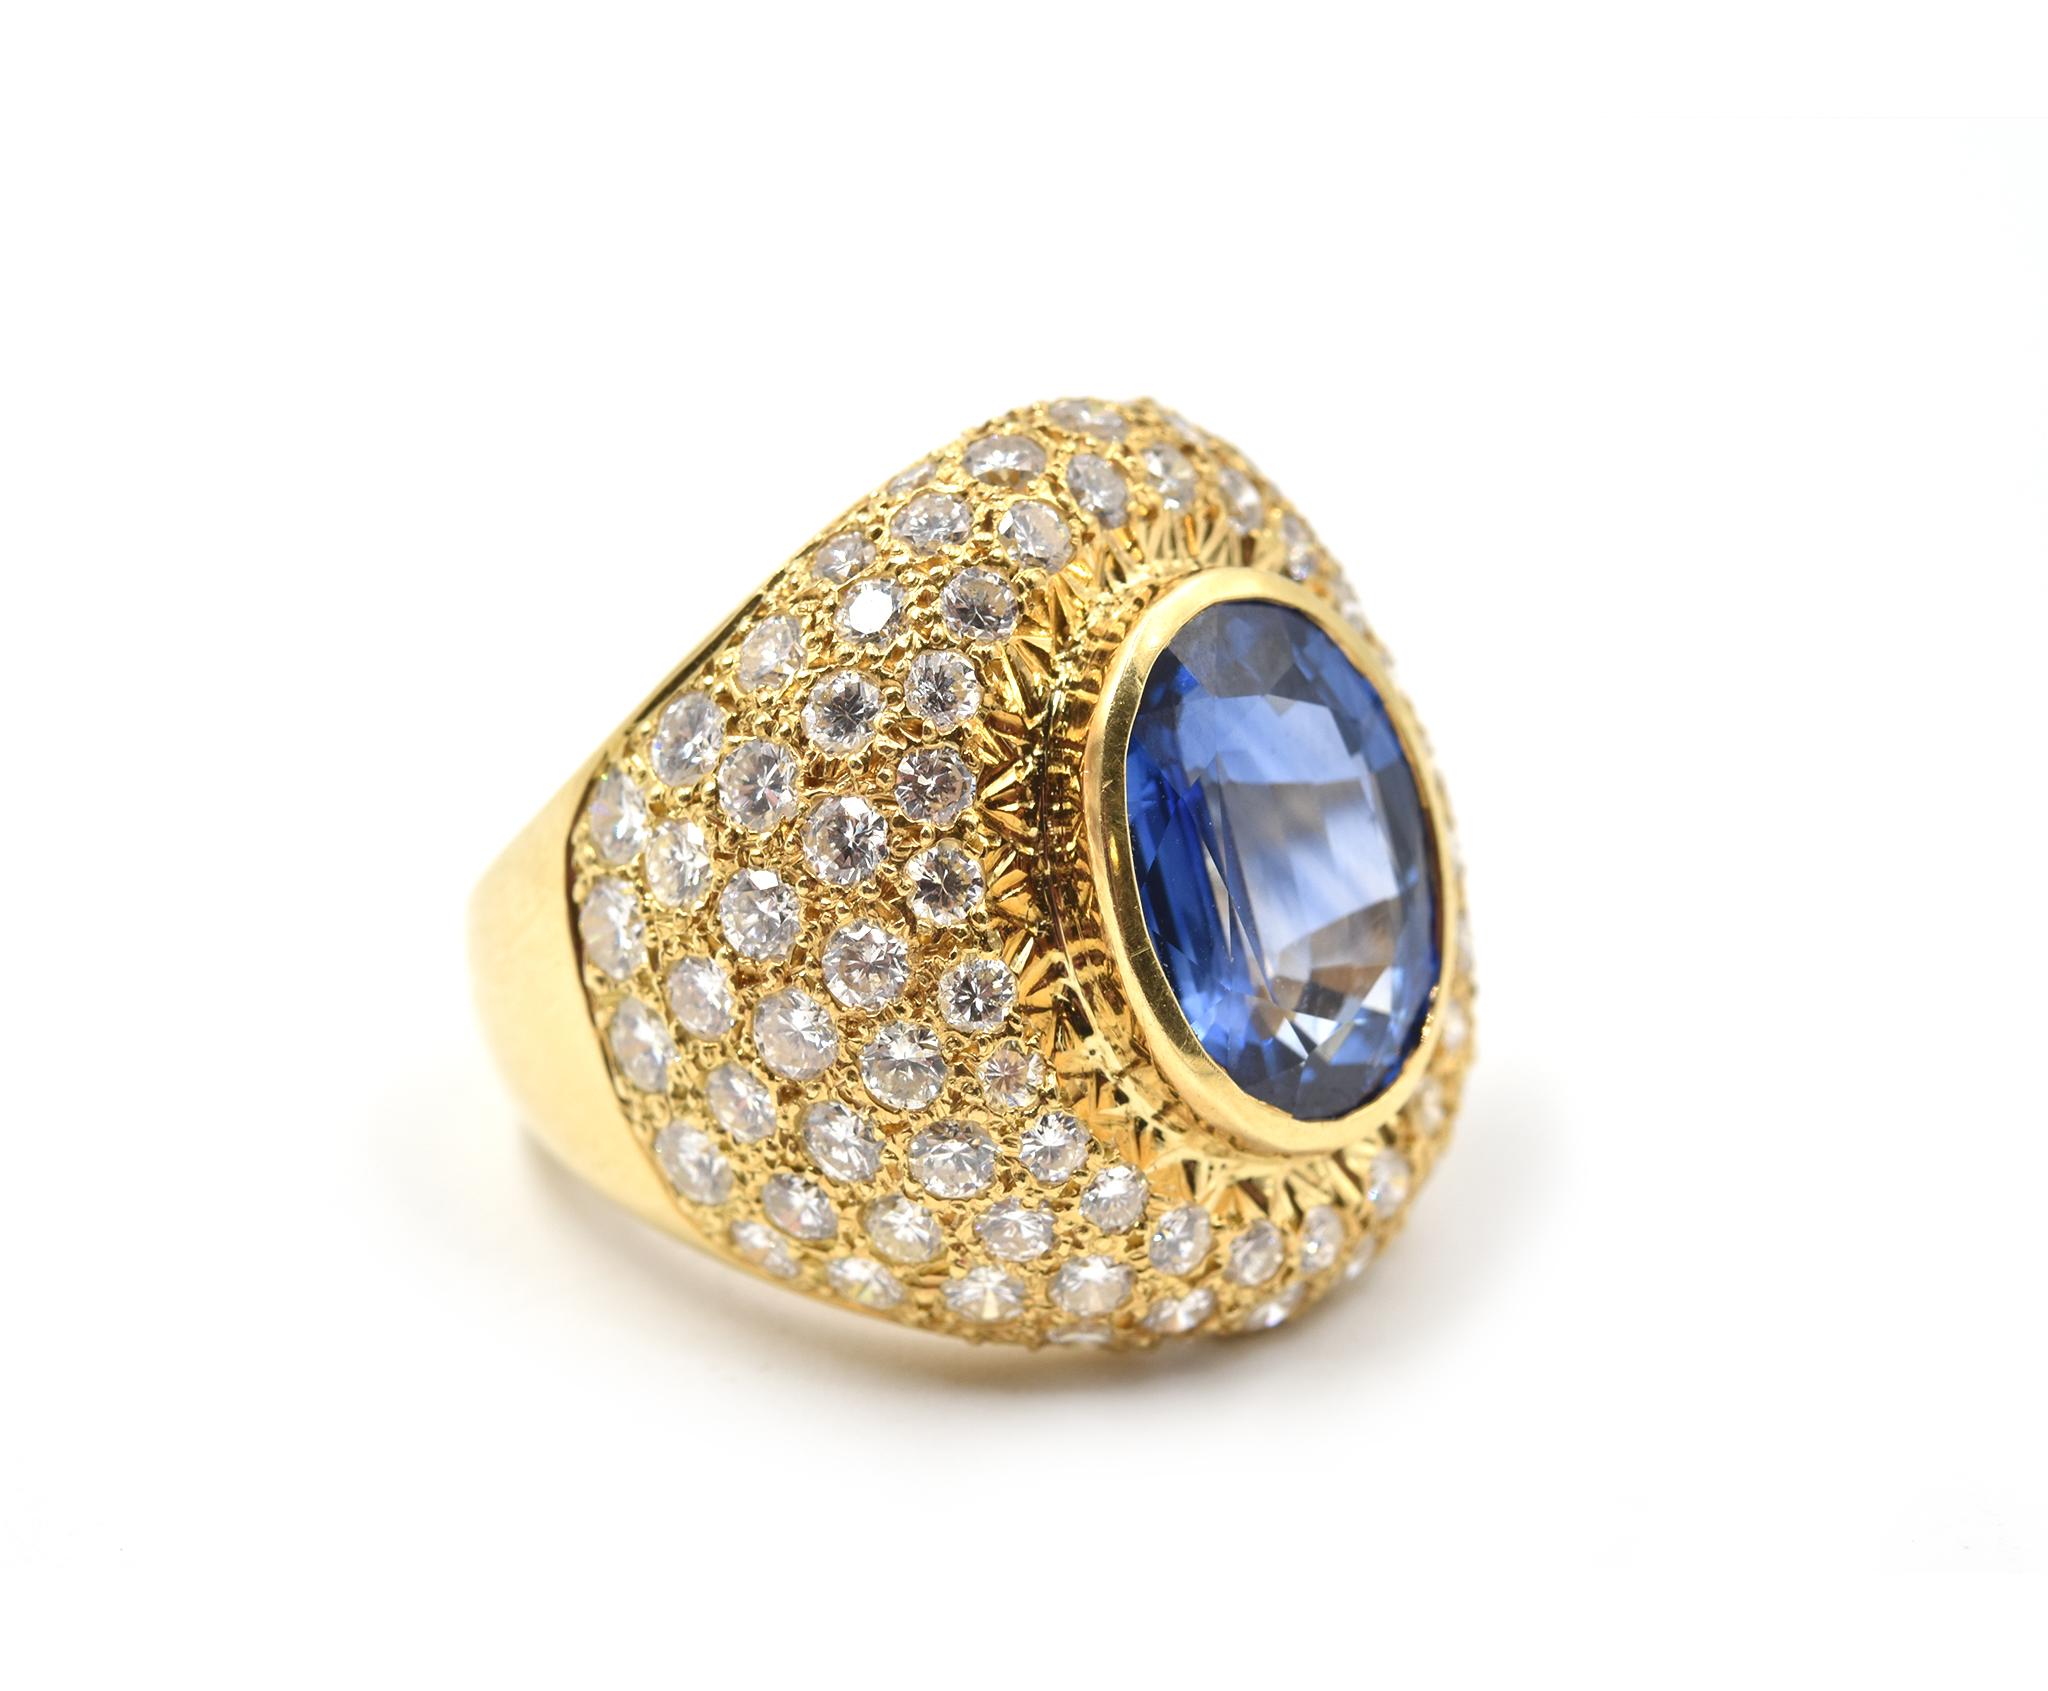 Designer: custom design
Material: 18k yellow gold
Sapphires: oval cut 5.67 carat
Diamonds: 88 round brilliant cut = 1.60 carat weight
Color: H
Clarity: VS
Ring Size: 5 3/4 (please allow two additional shipping days for sizing requests) 
Dimensions: